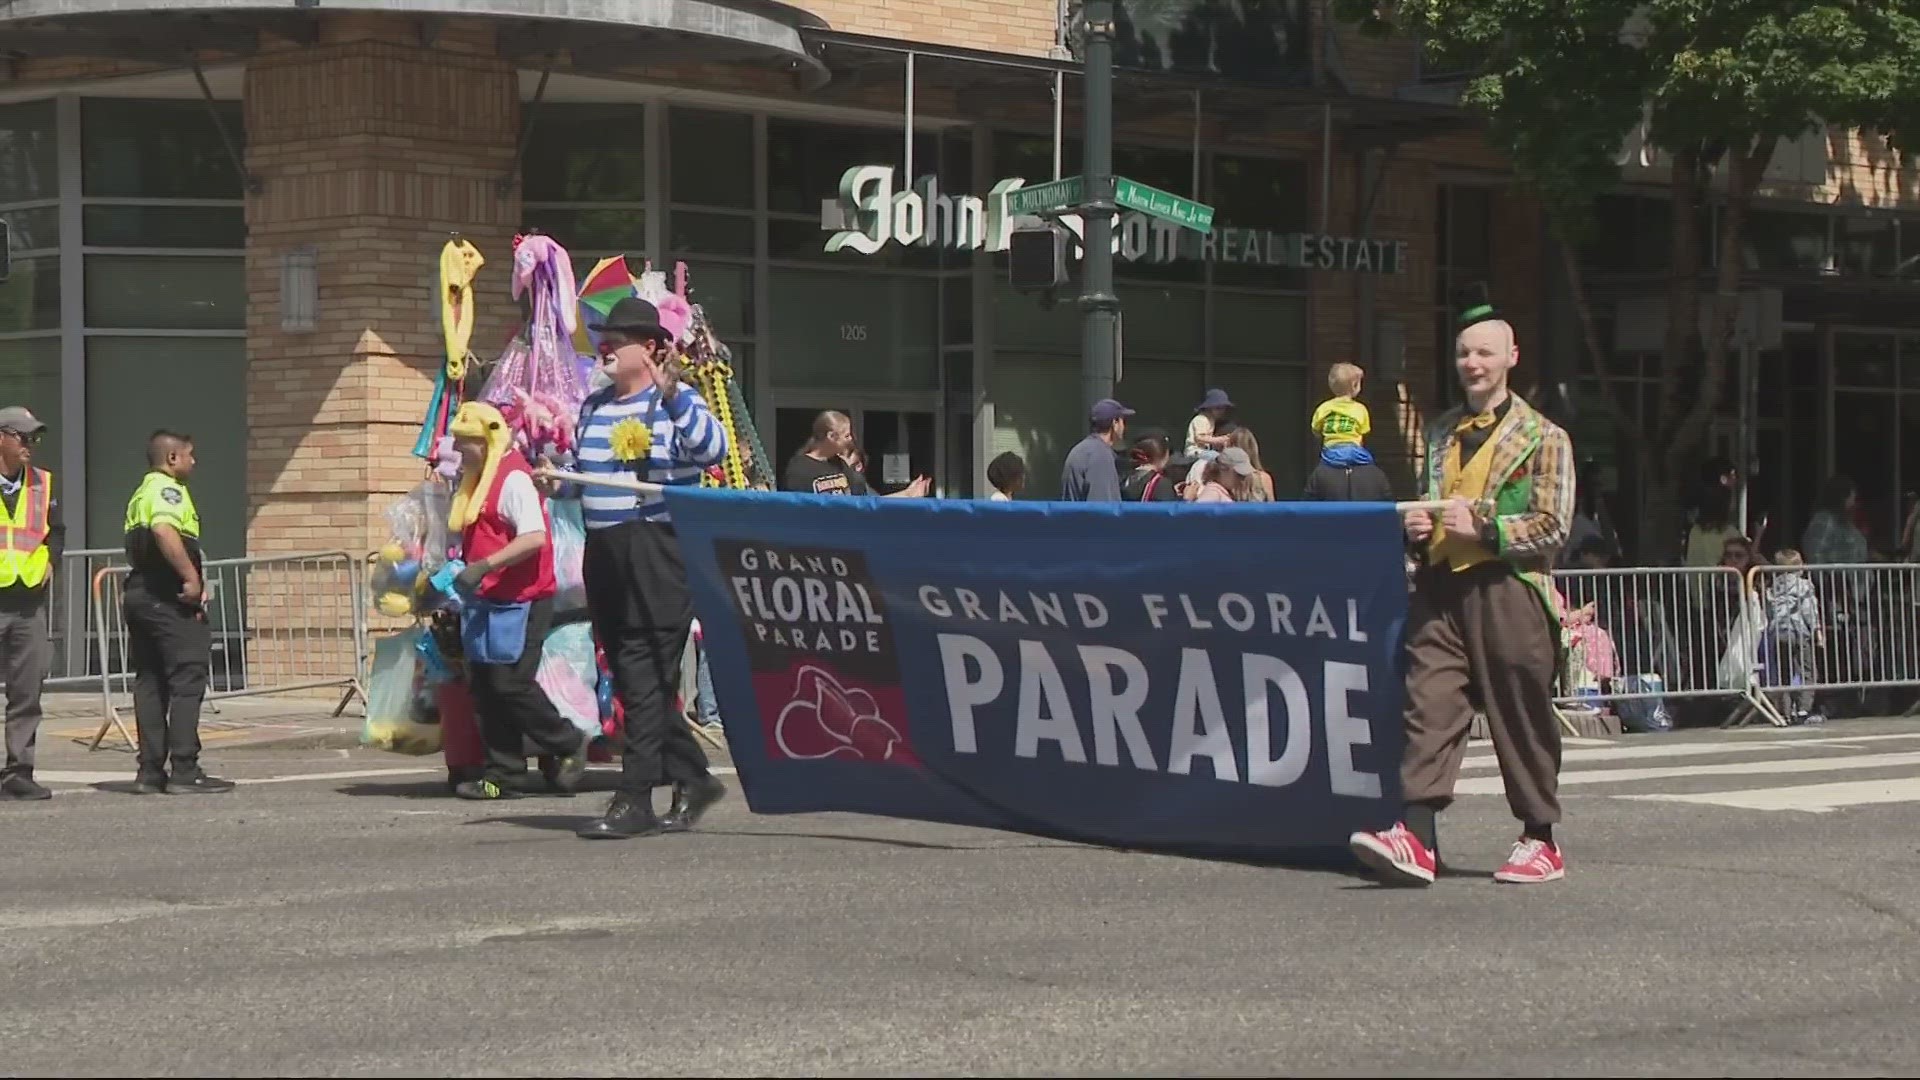 The Grand Floral Parade kicks off from the Veterans Memorial Coliseum in North Portland. The historic parade has been around for over 100 years.